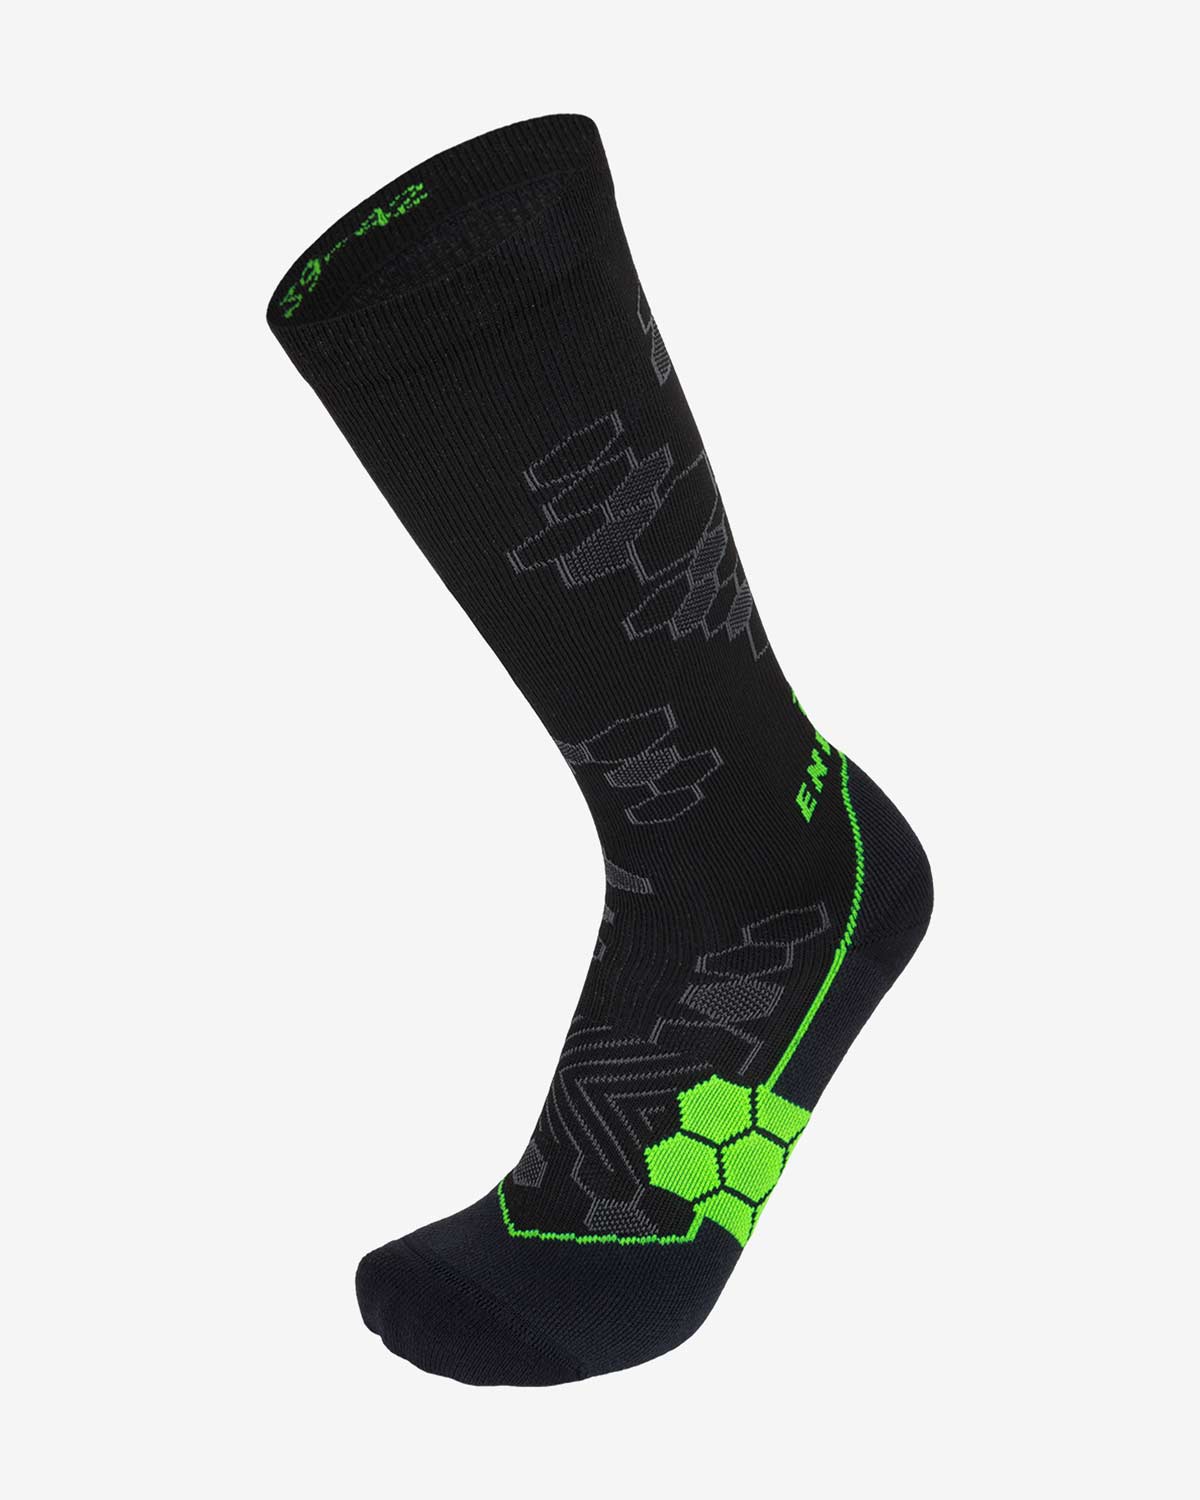 Enertor Exercise Recovery Socks - Black and Green